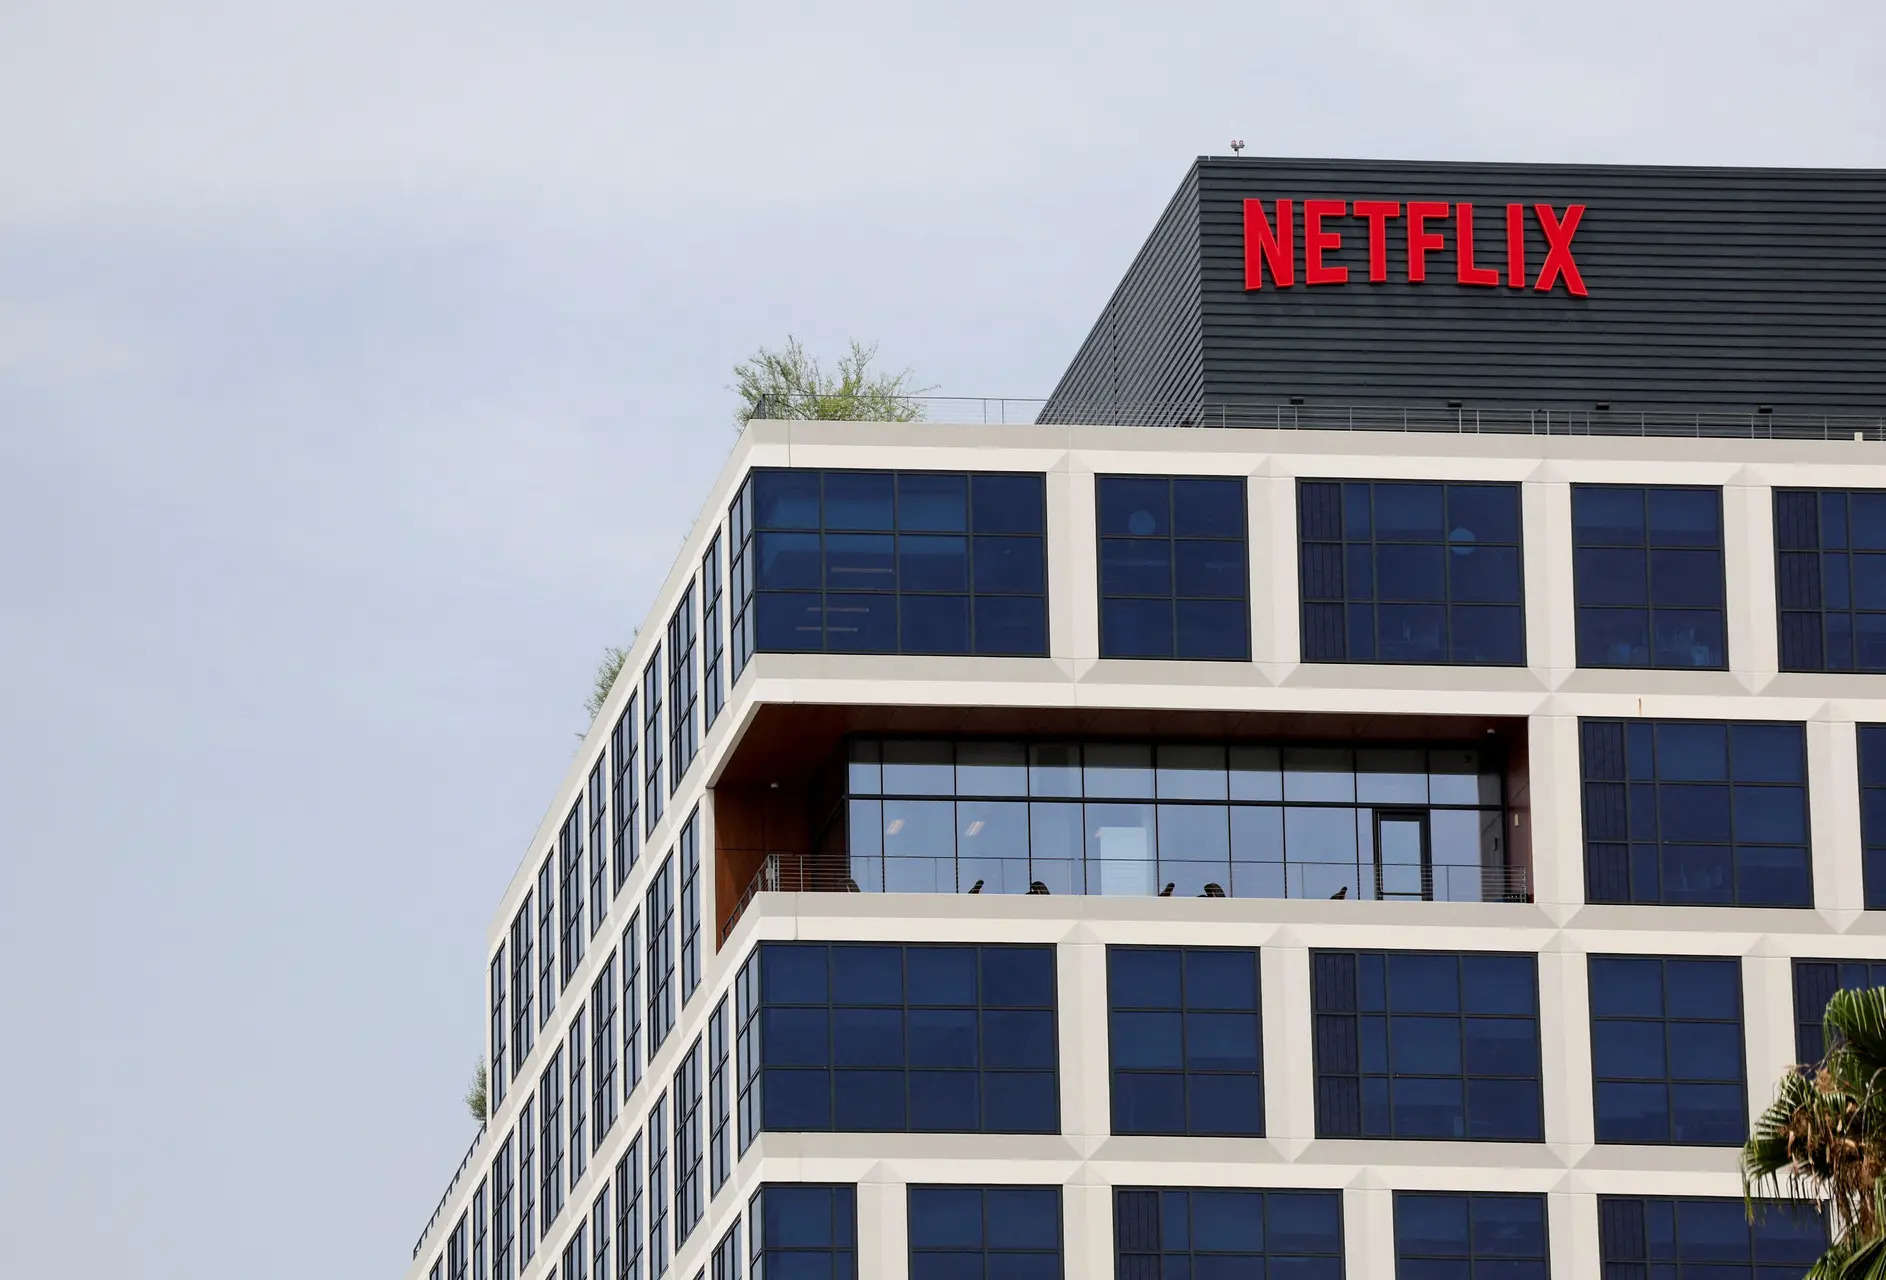 India among key drivers of Netflix's paid net subscriber additions, revenue percentage growth in Q2 